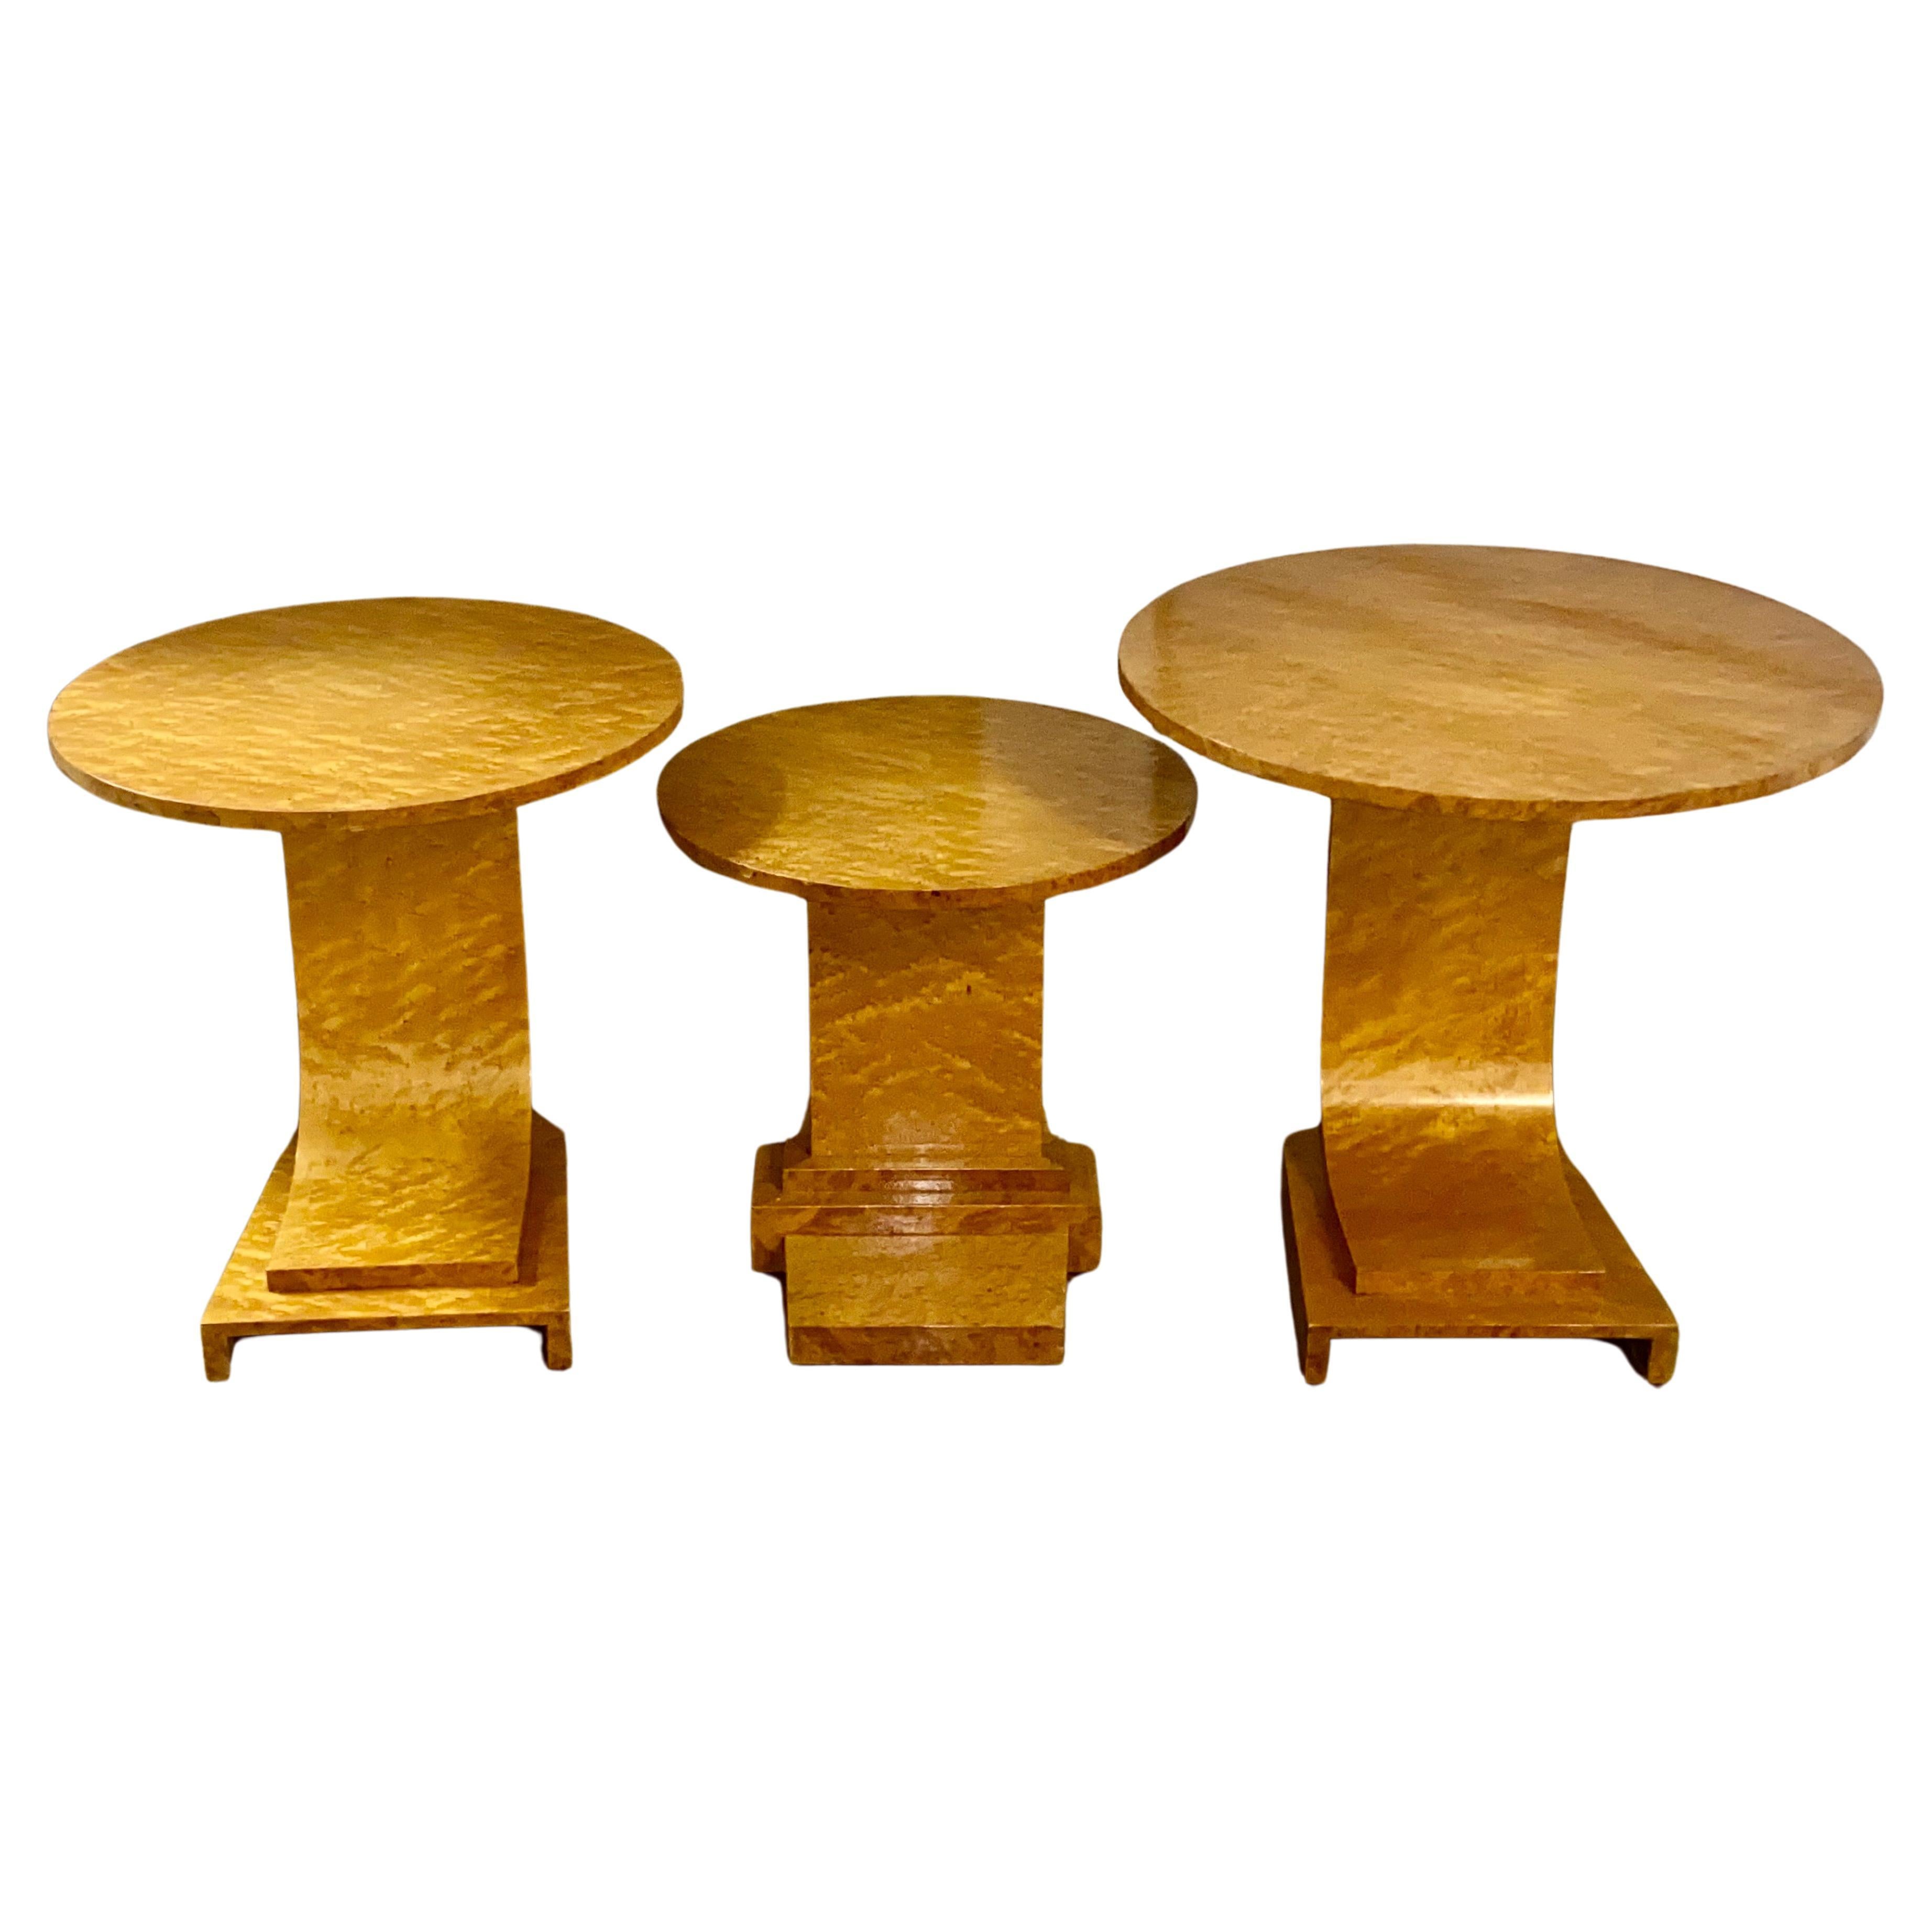 A Rare Art Deco Blonde Birds Eye Maple J Nest of Tables by Epstein Circa 1930 For Sale 2